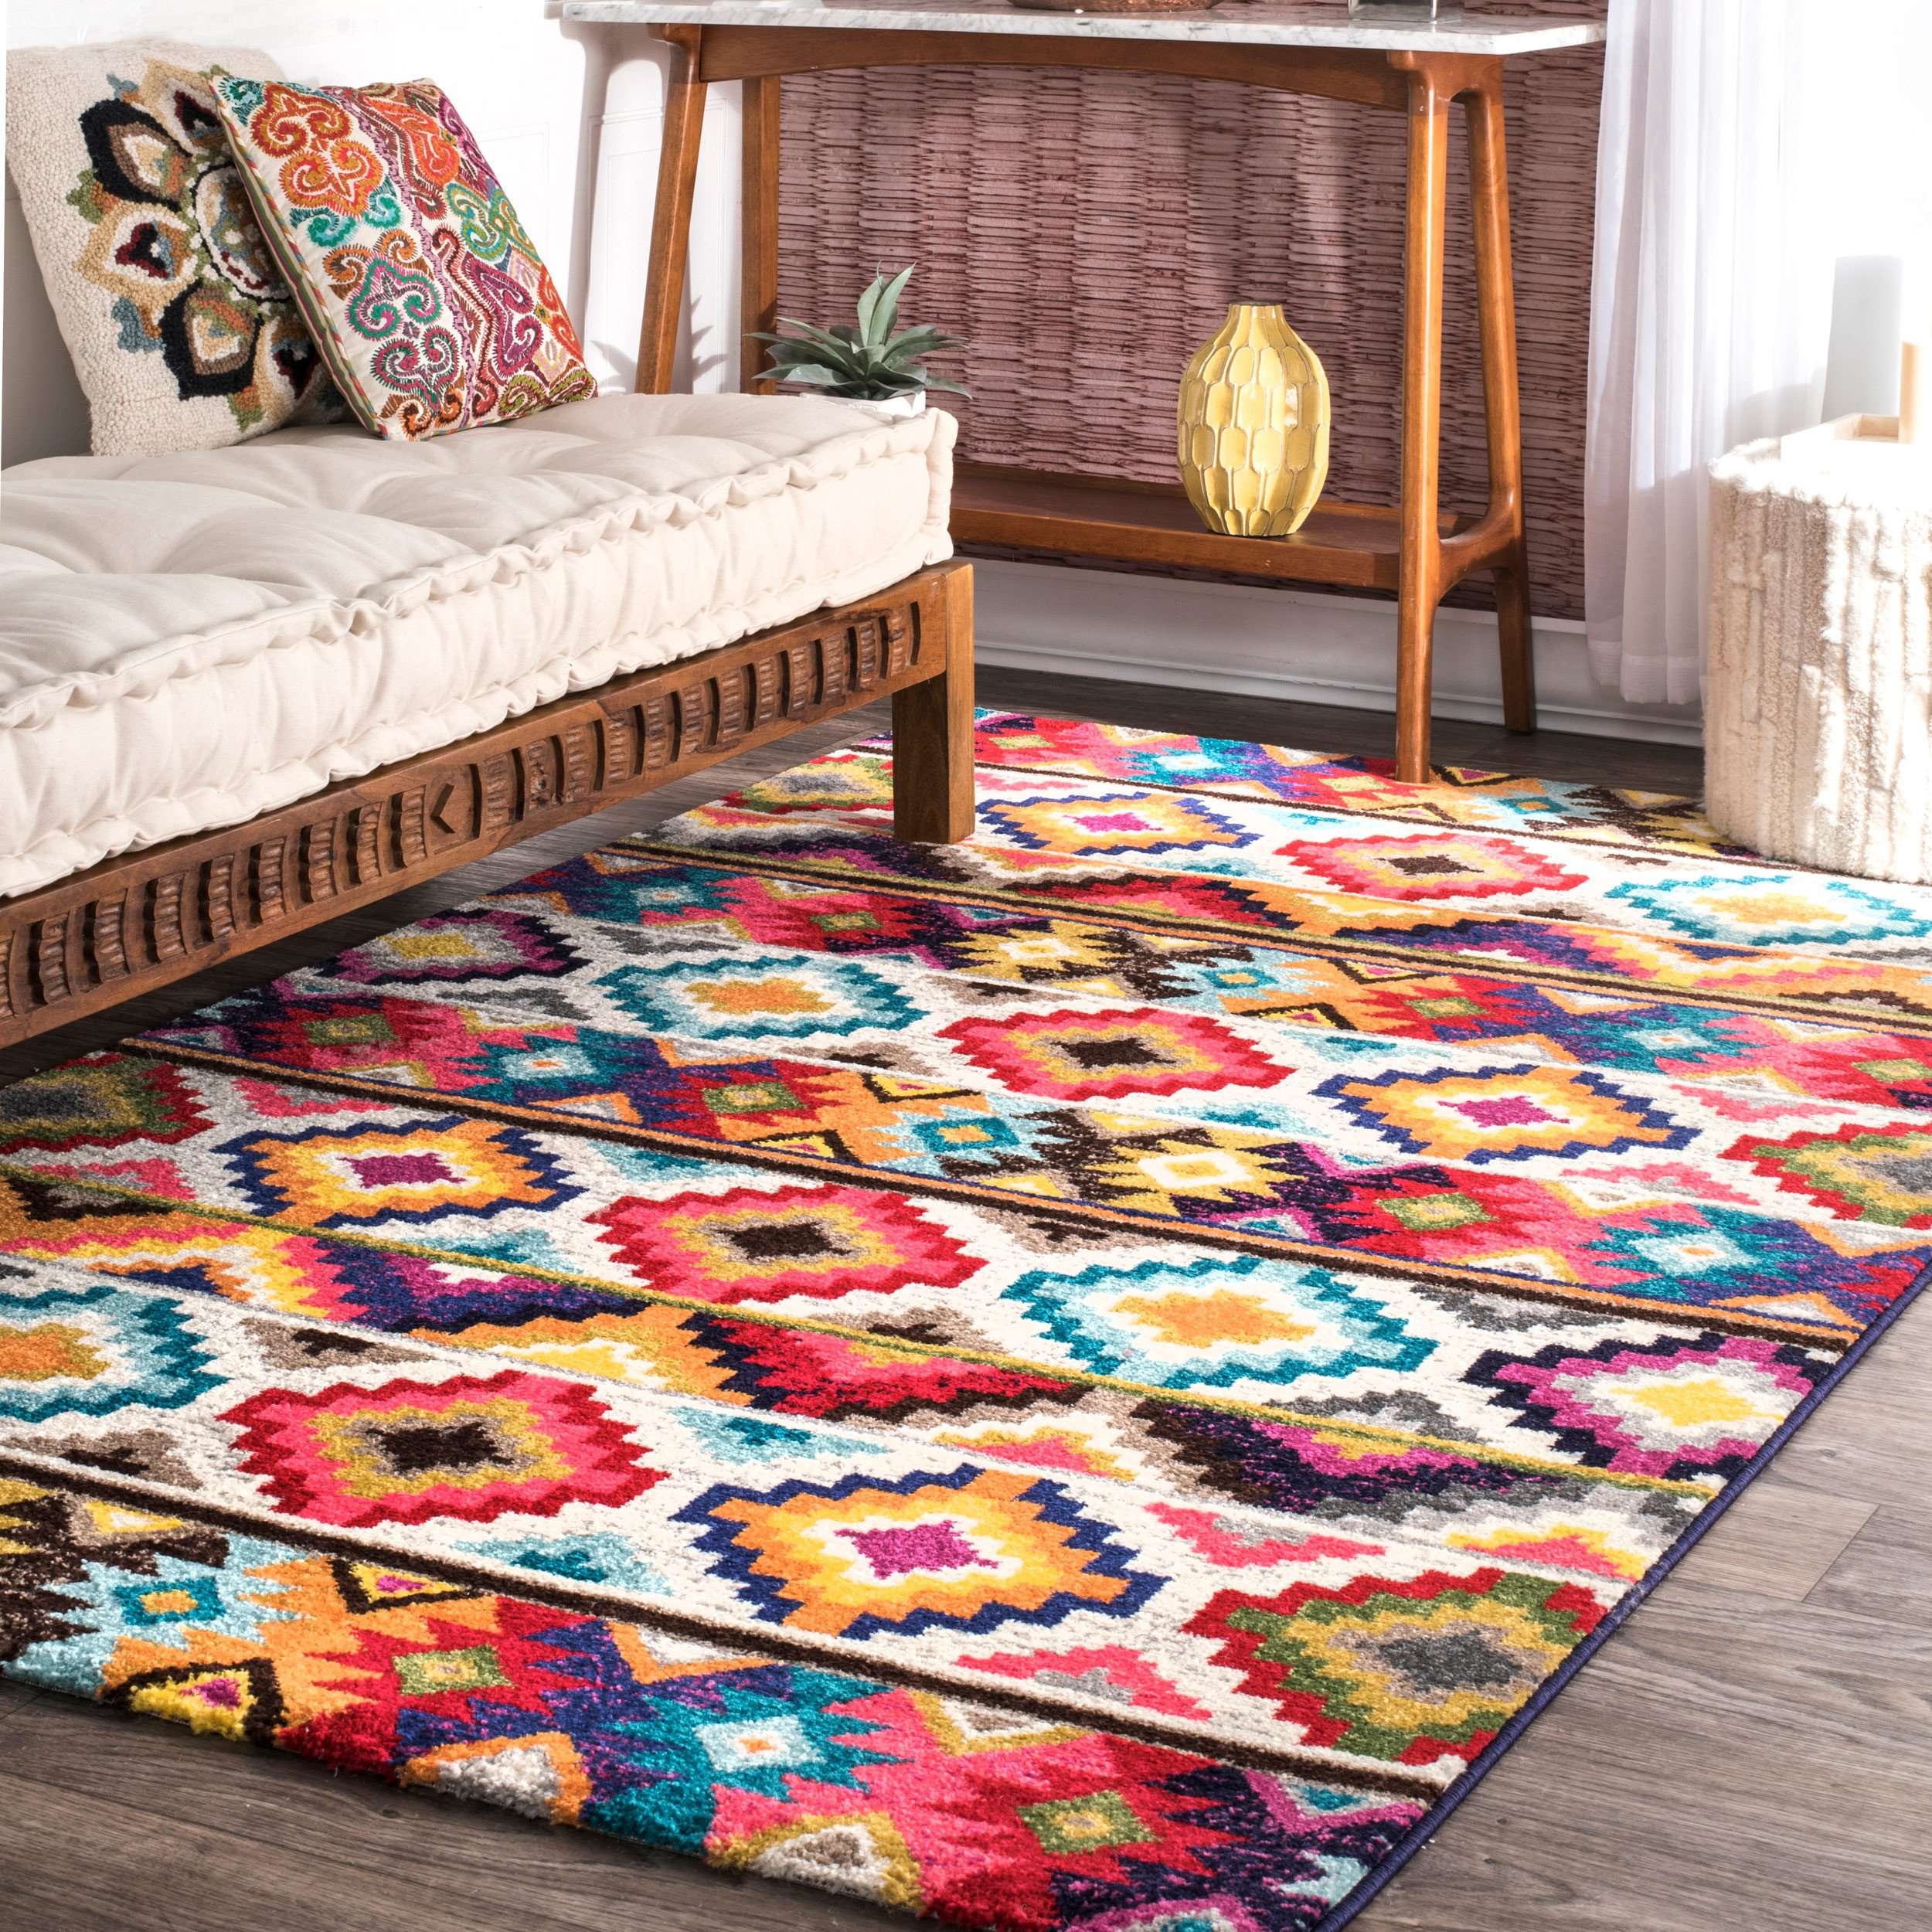 Living Room Decoration with Colorful Rug